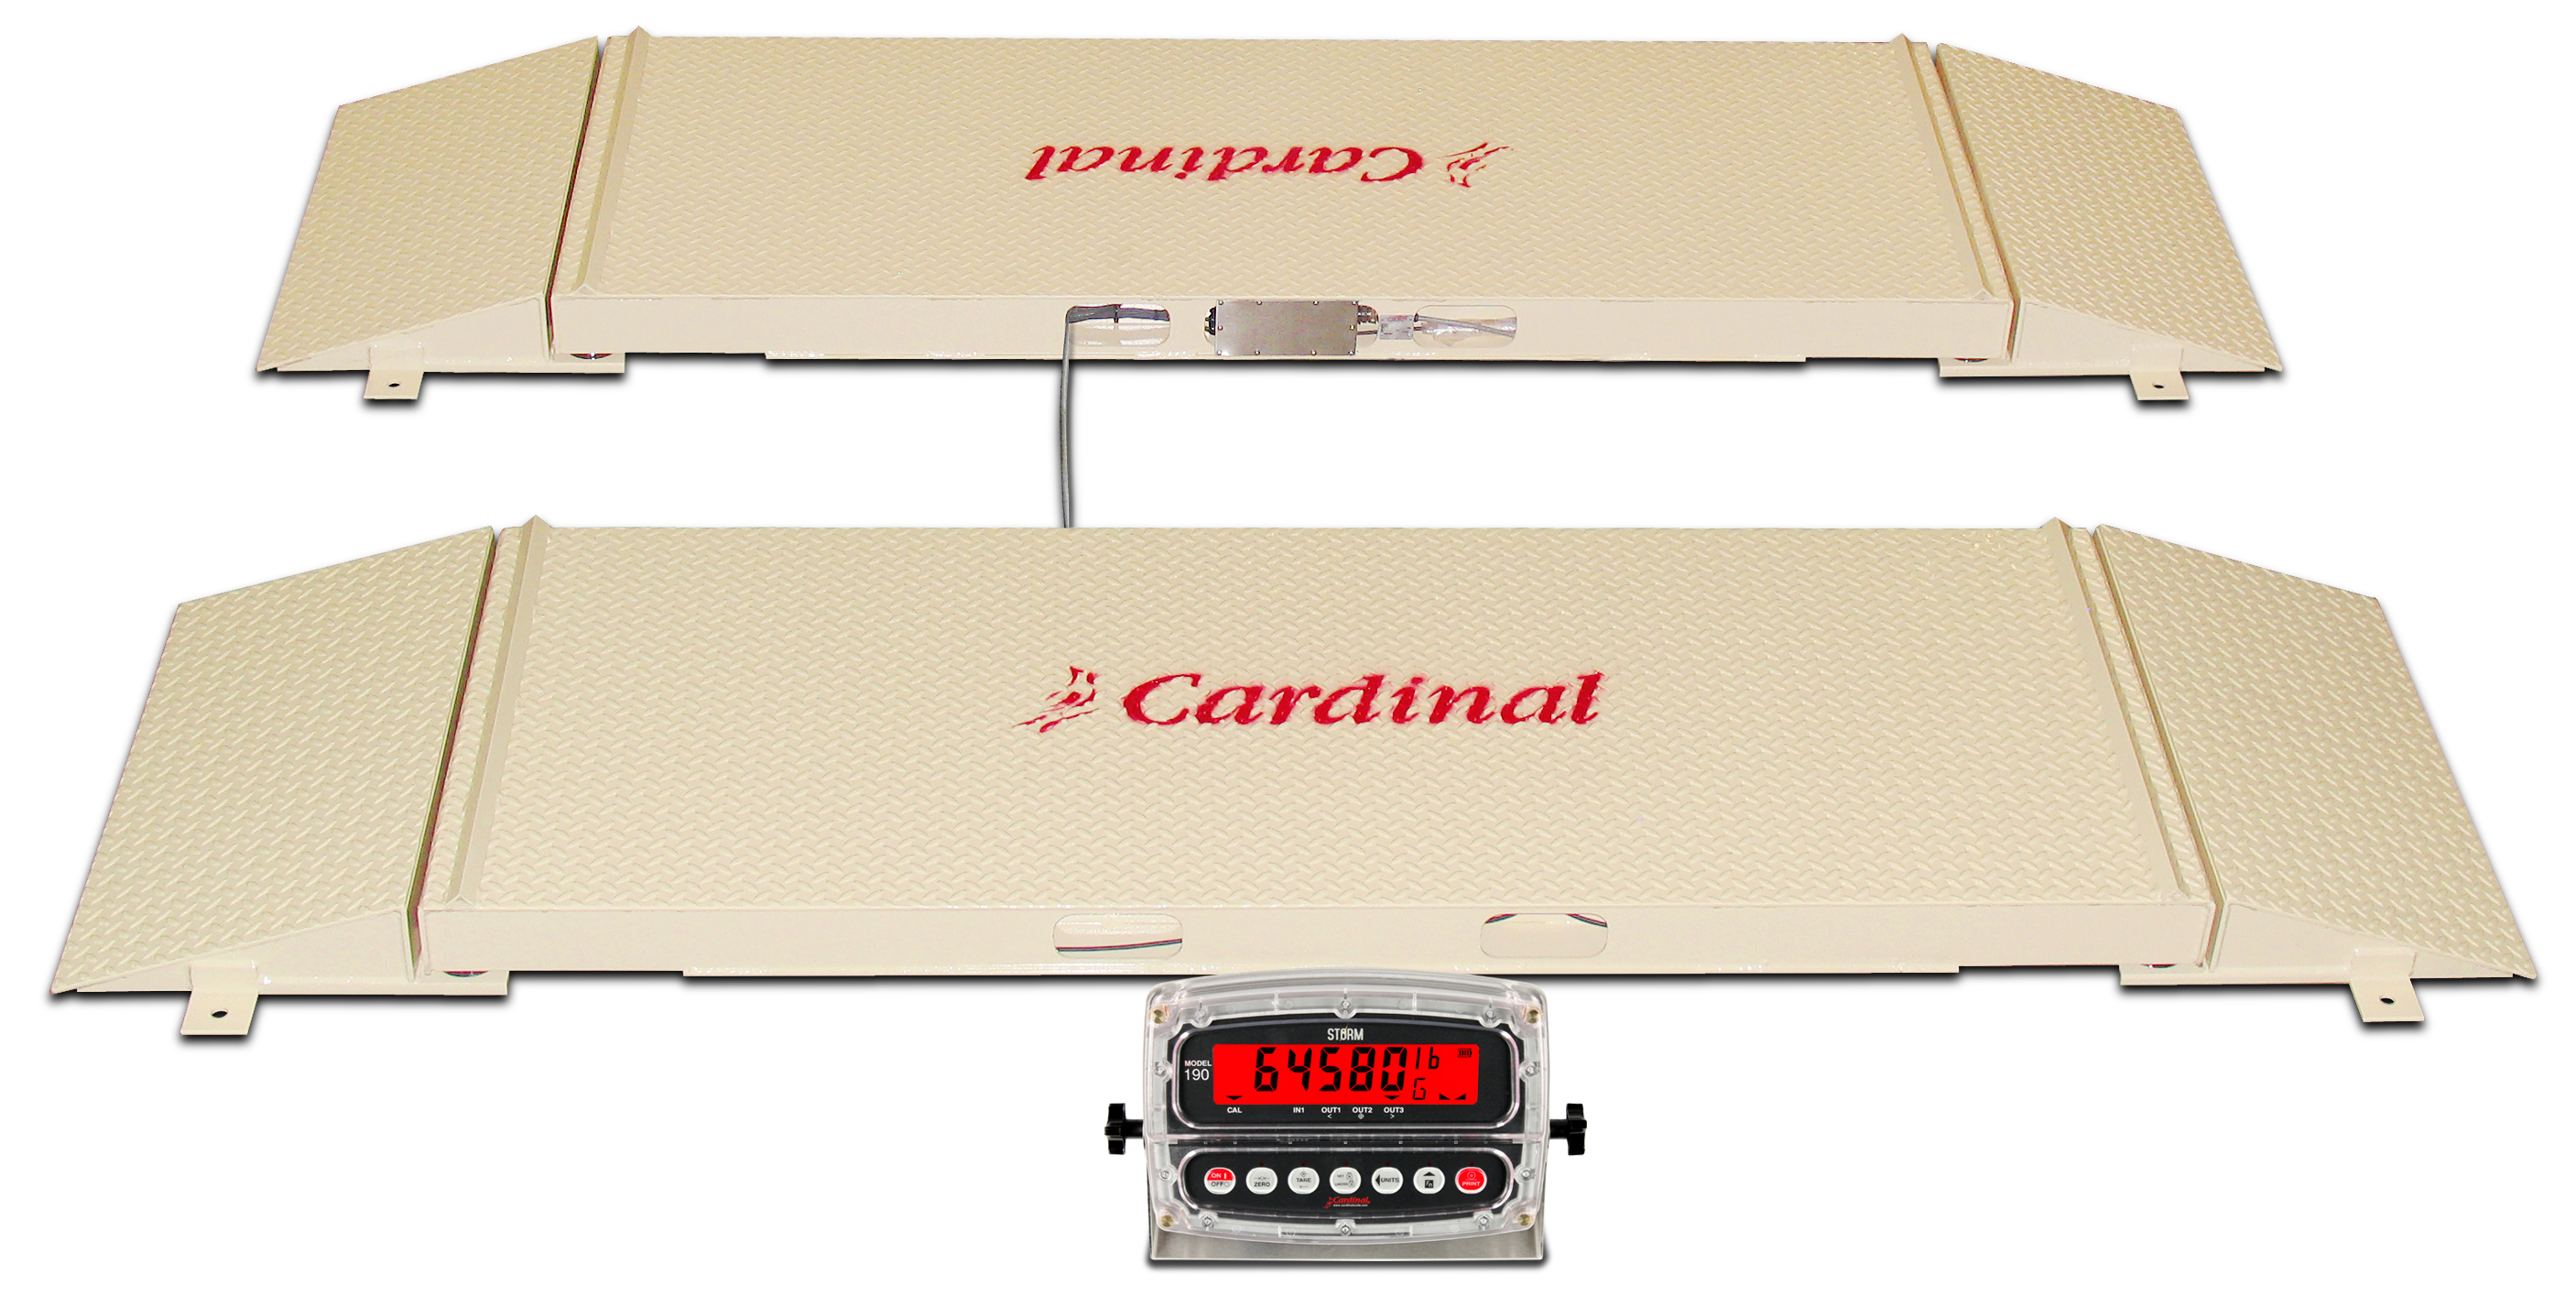 Cardinal Scale 760pspa Axle Scales 